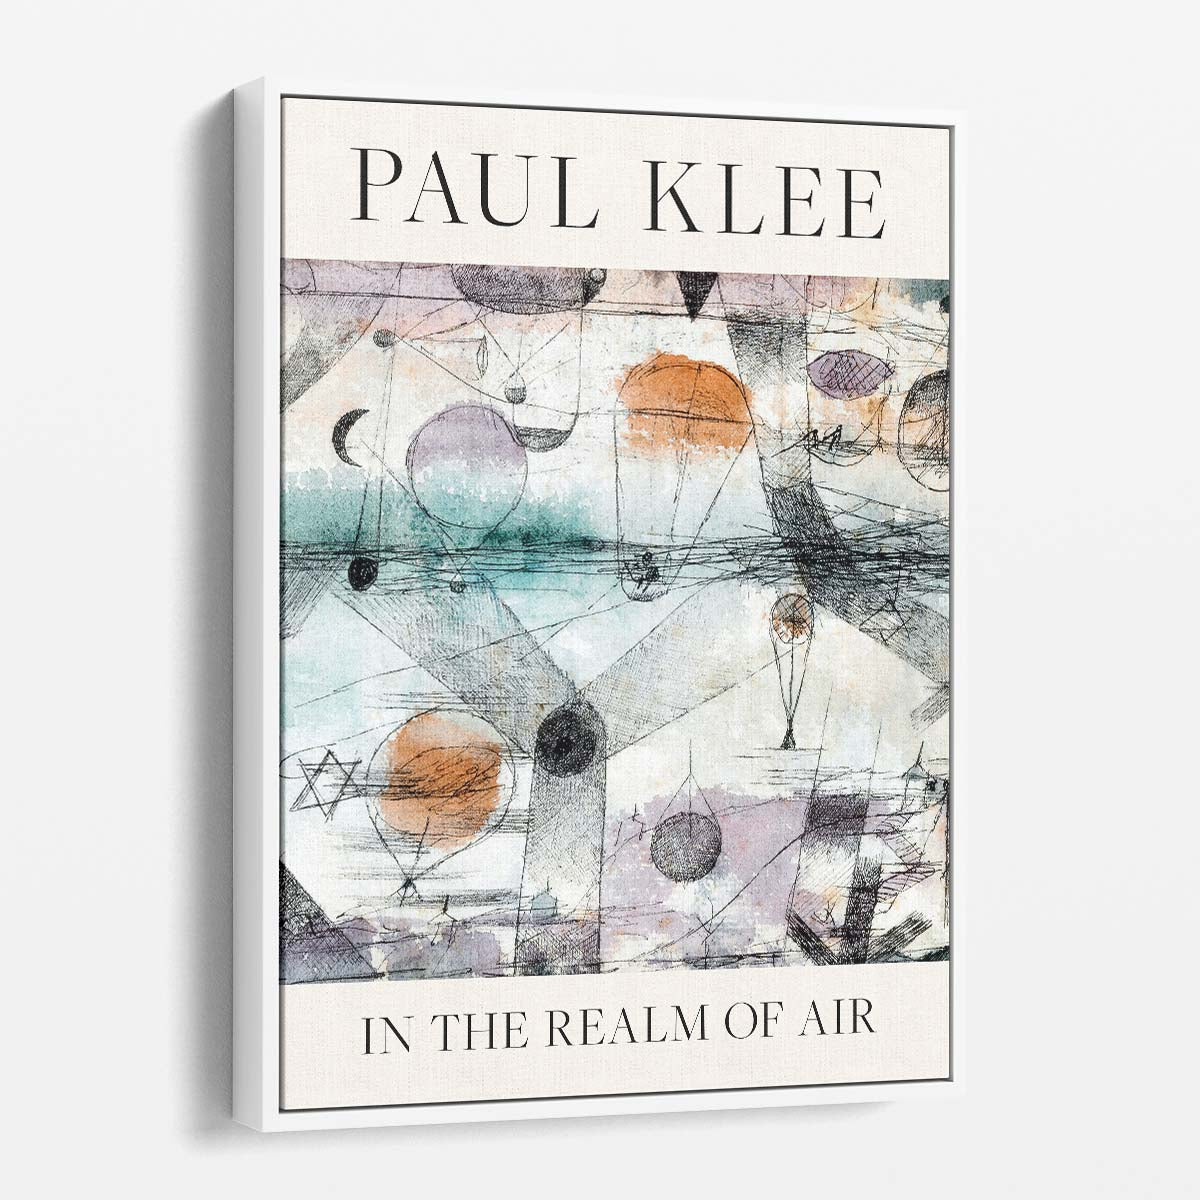 1917 Paul Klee Watercolor Illustration, 'In the Realm of Air' Poster by Luxuriance Designs, made in USA